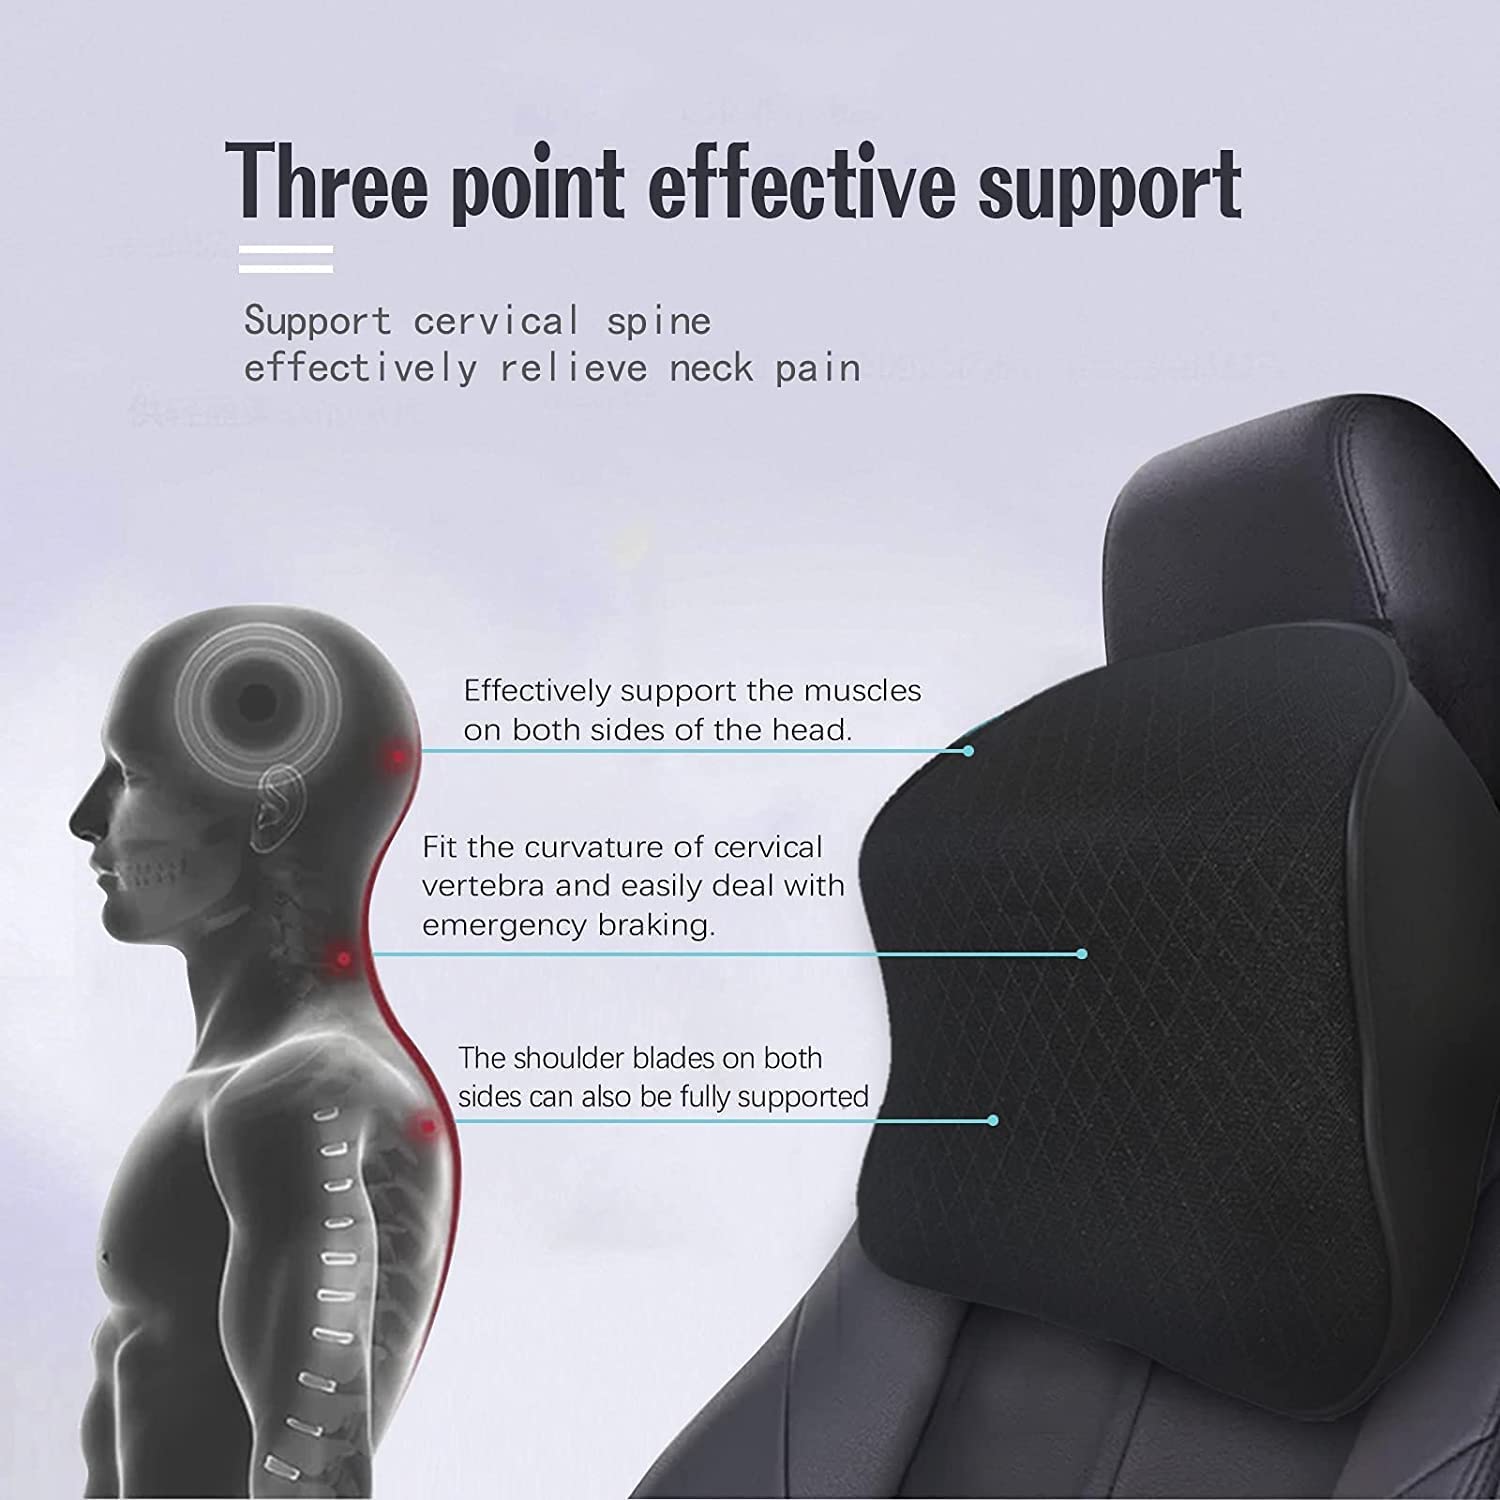 Help Relieve Neck Pain & Improve Circulation/Fit Most Vehicles